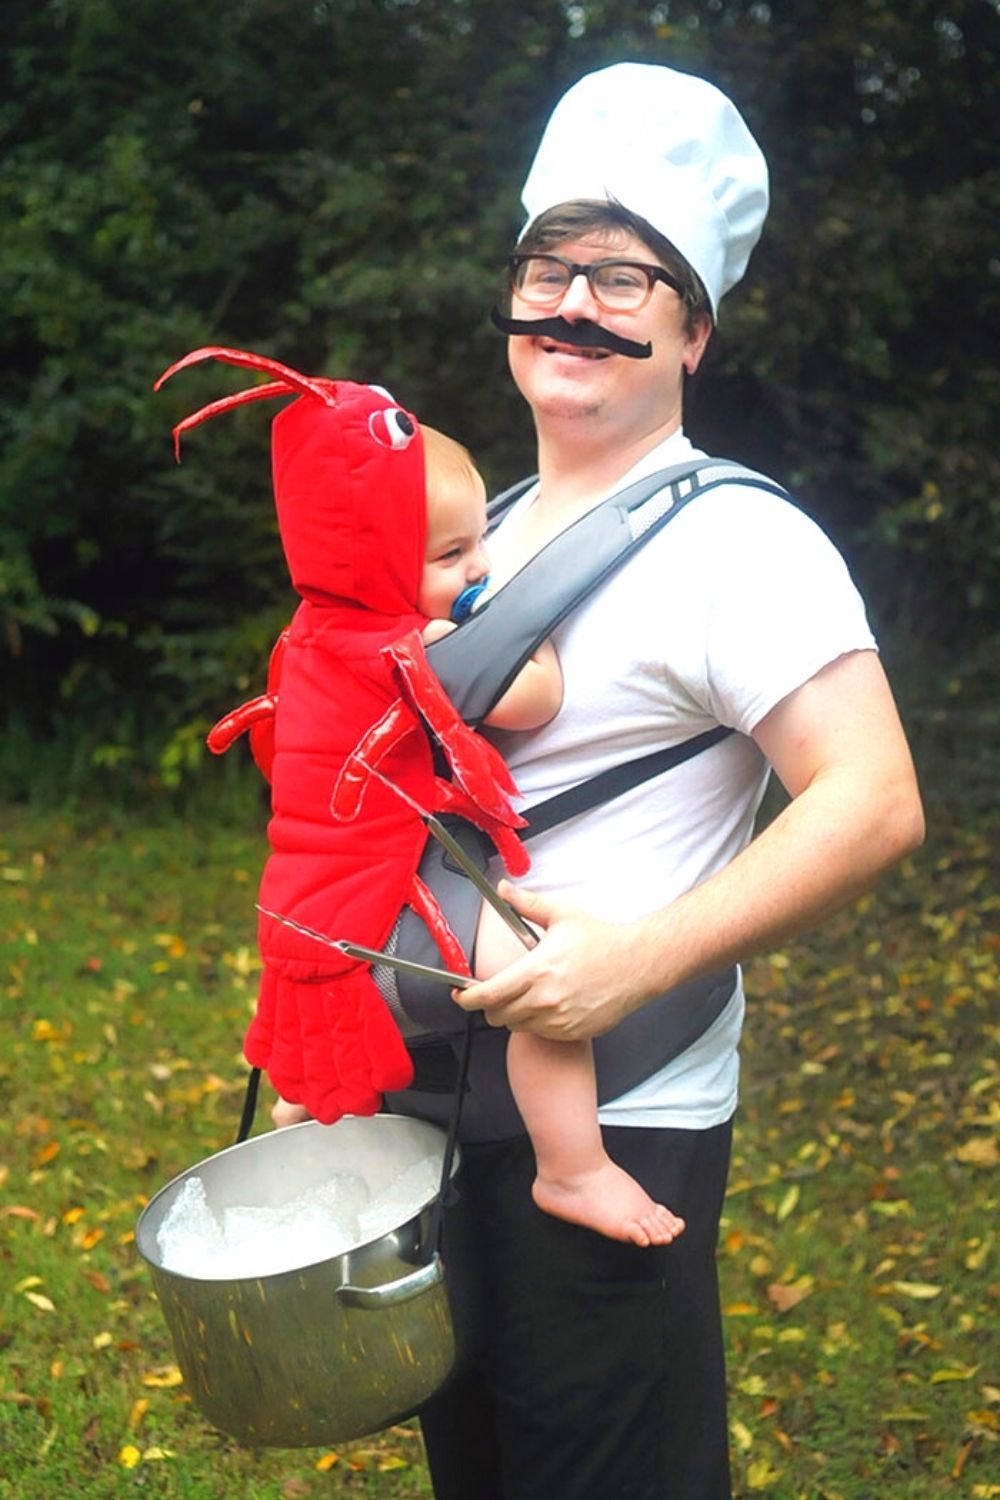 Chef And Lobster Halloween Costume.